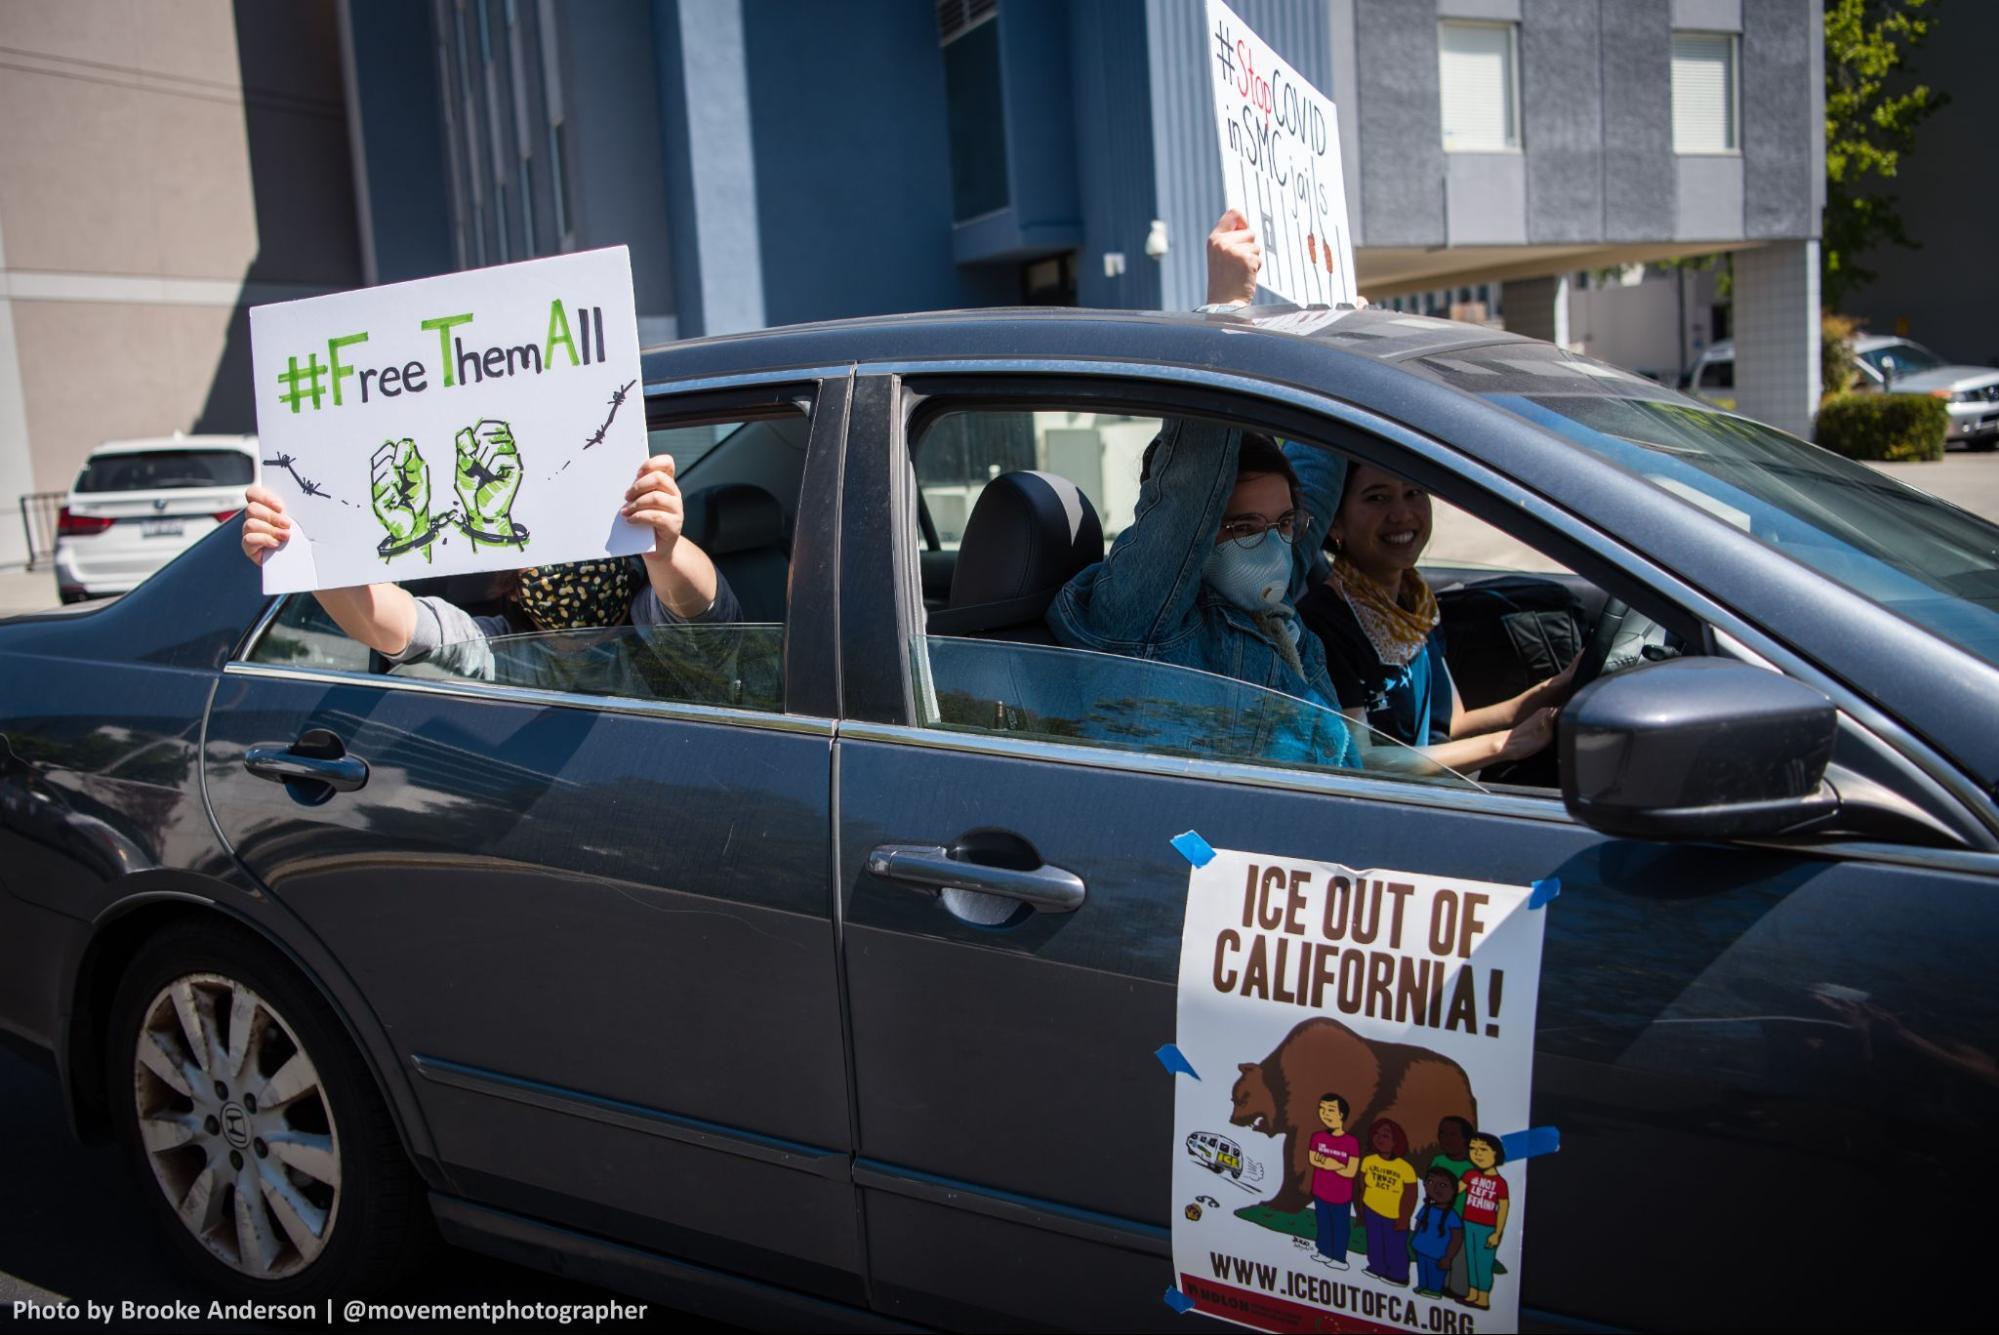 Community members in a car hold out "ICE out of CA" signs during a VISION car rally.